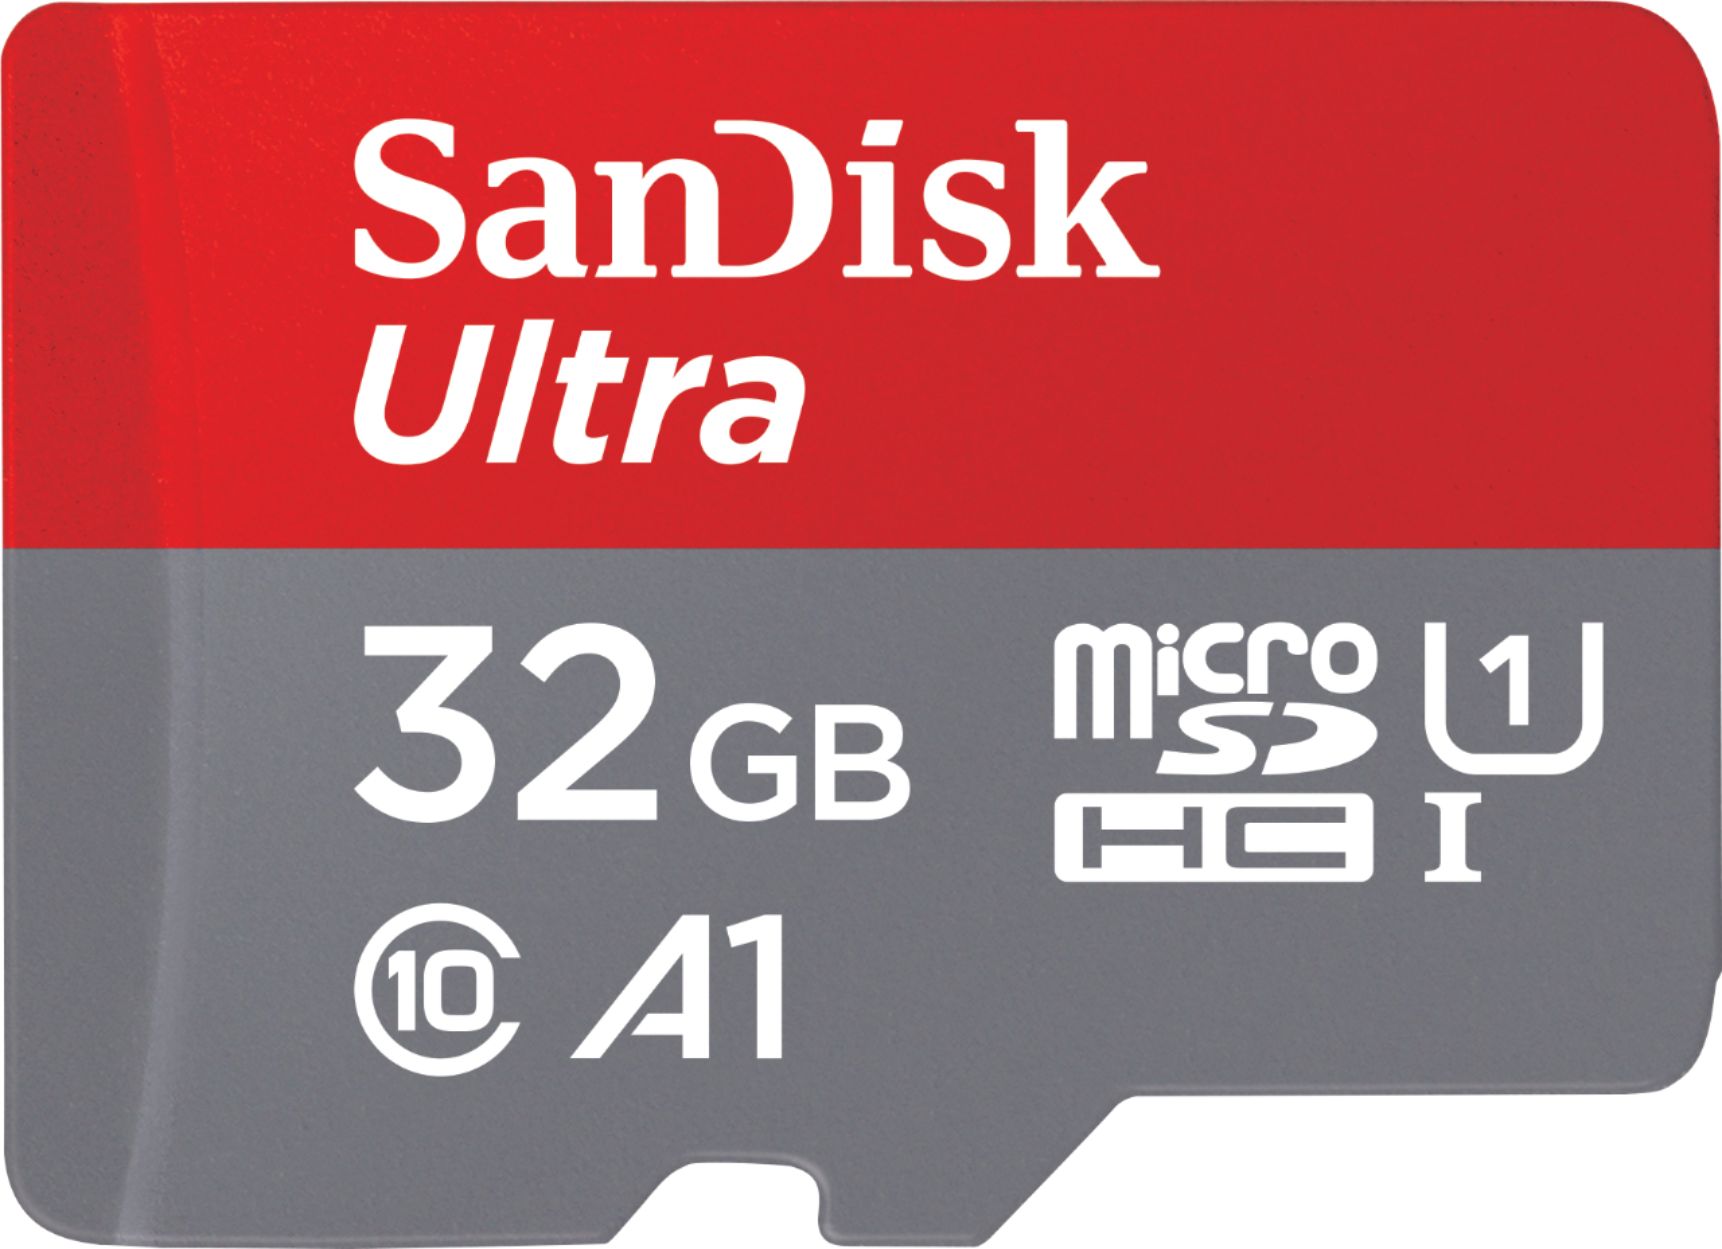 SANDISK ULTRA MICRO SD 32GB CLASS 10 SD SDHC MEMORY CARD ADAPTER NEW! 